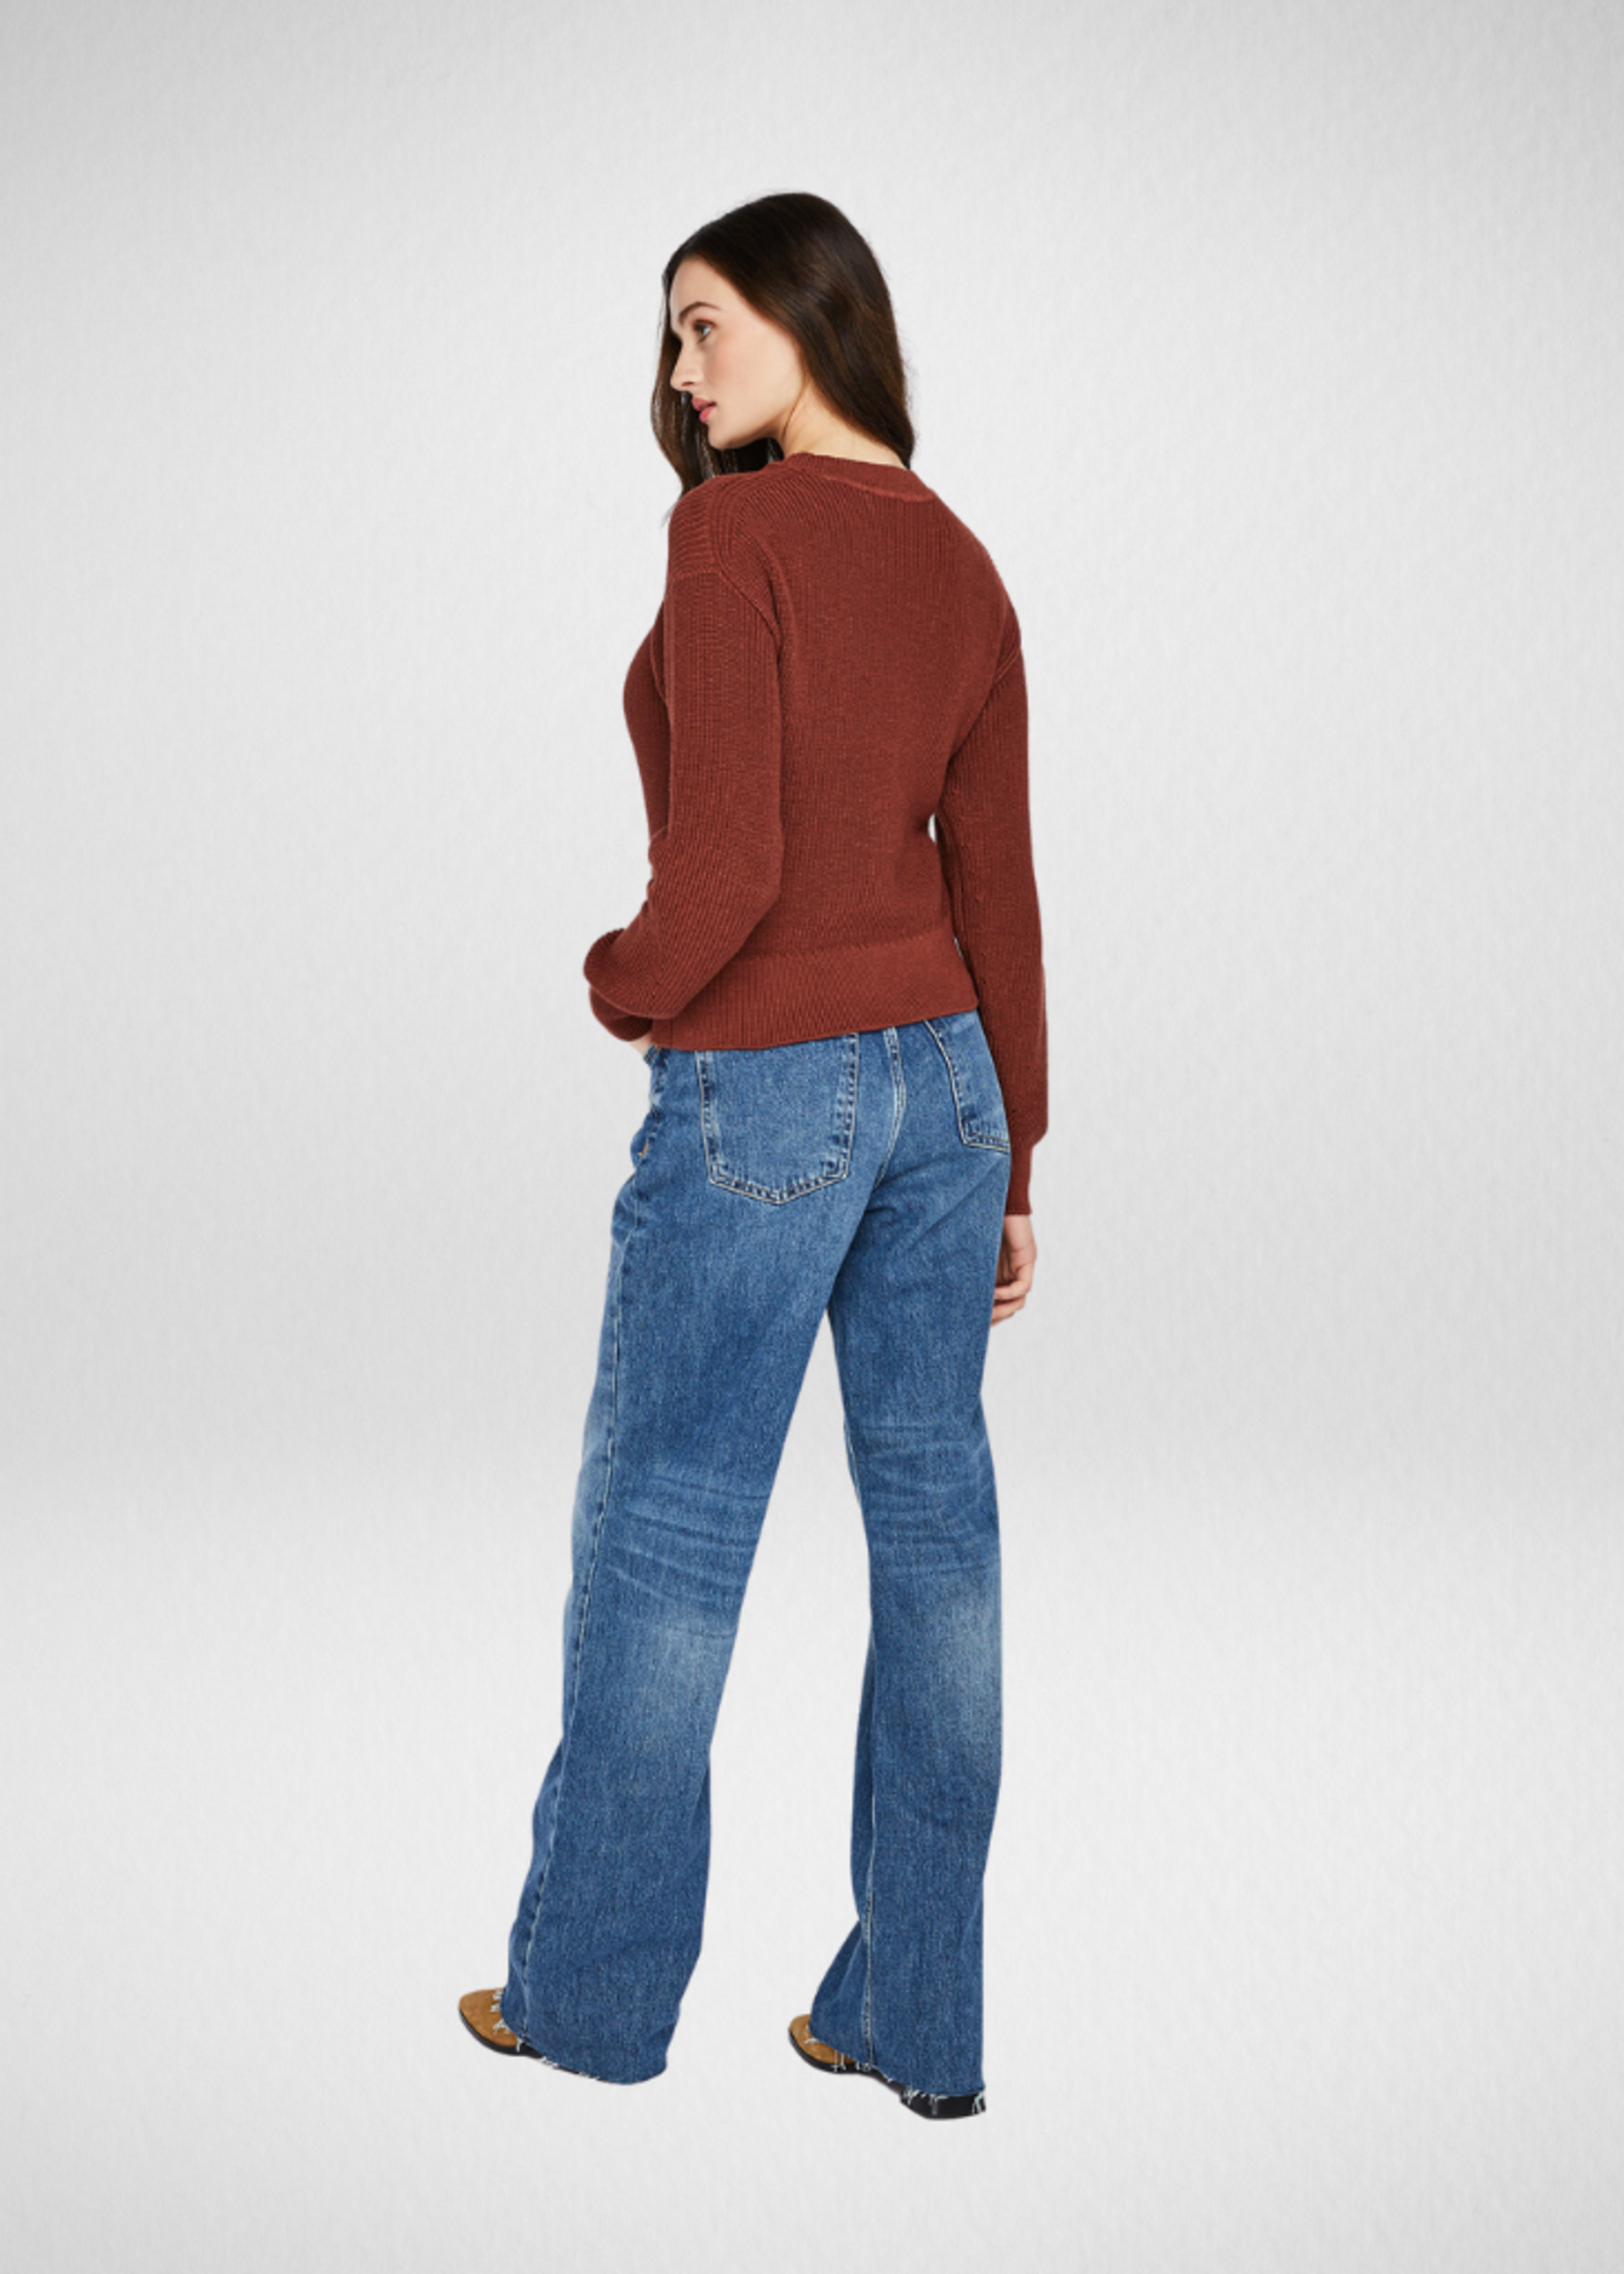 GENTLE FAWN 23 GENTLE FAWN ANDIE SWEATER